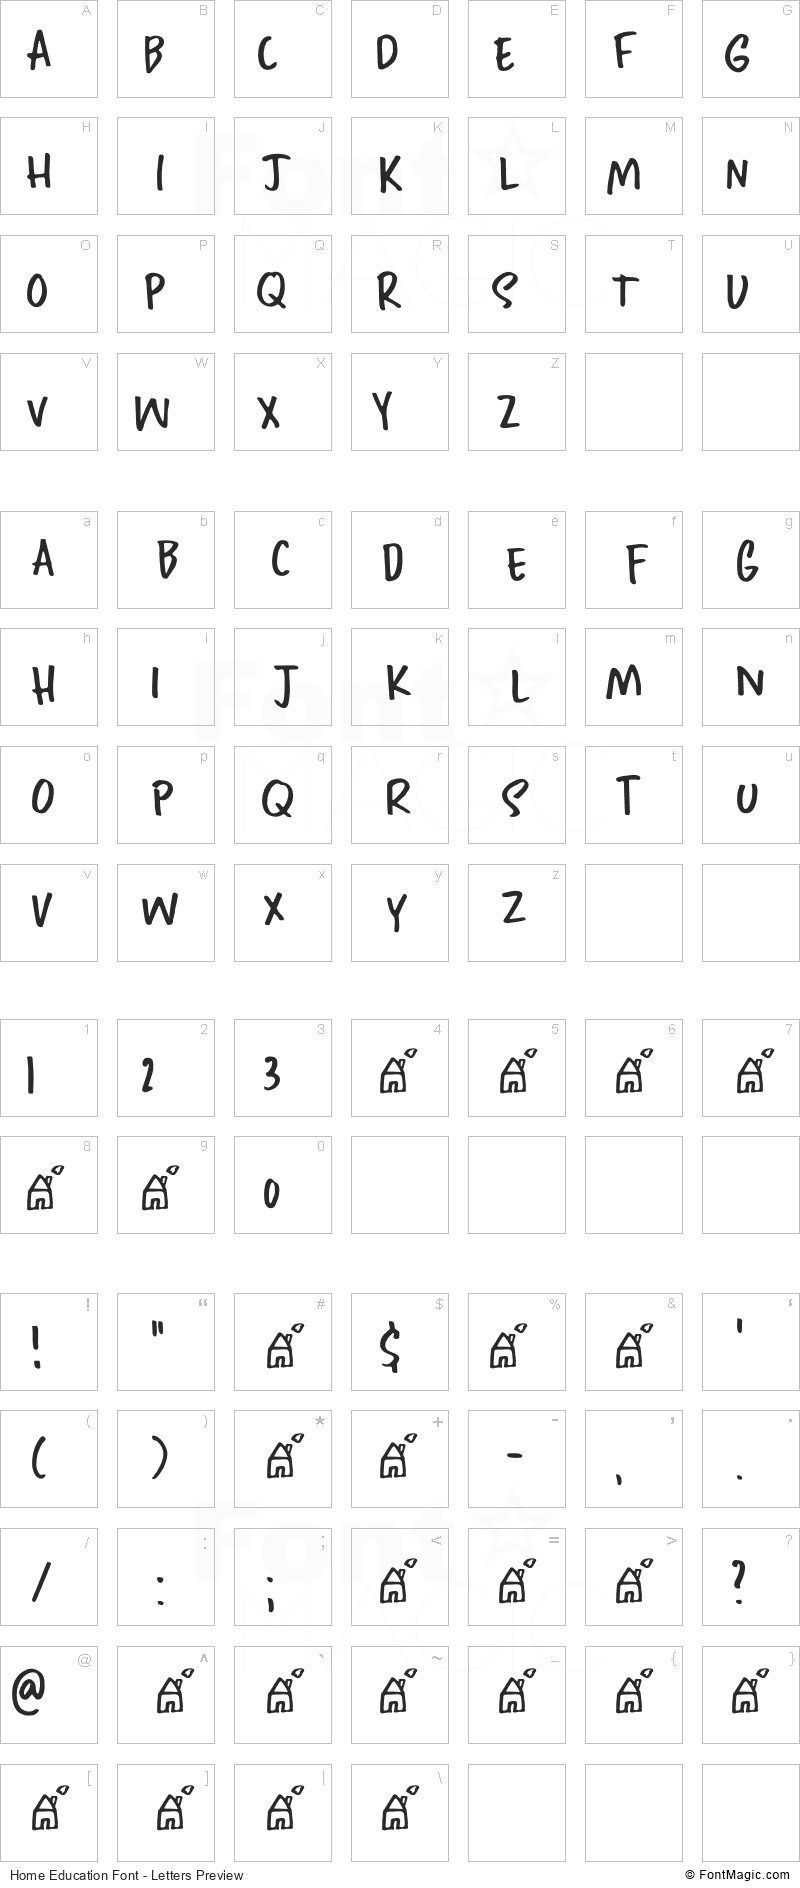 Home Education Font - All Latters Preview Chart